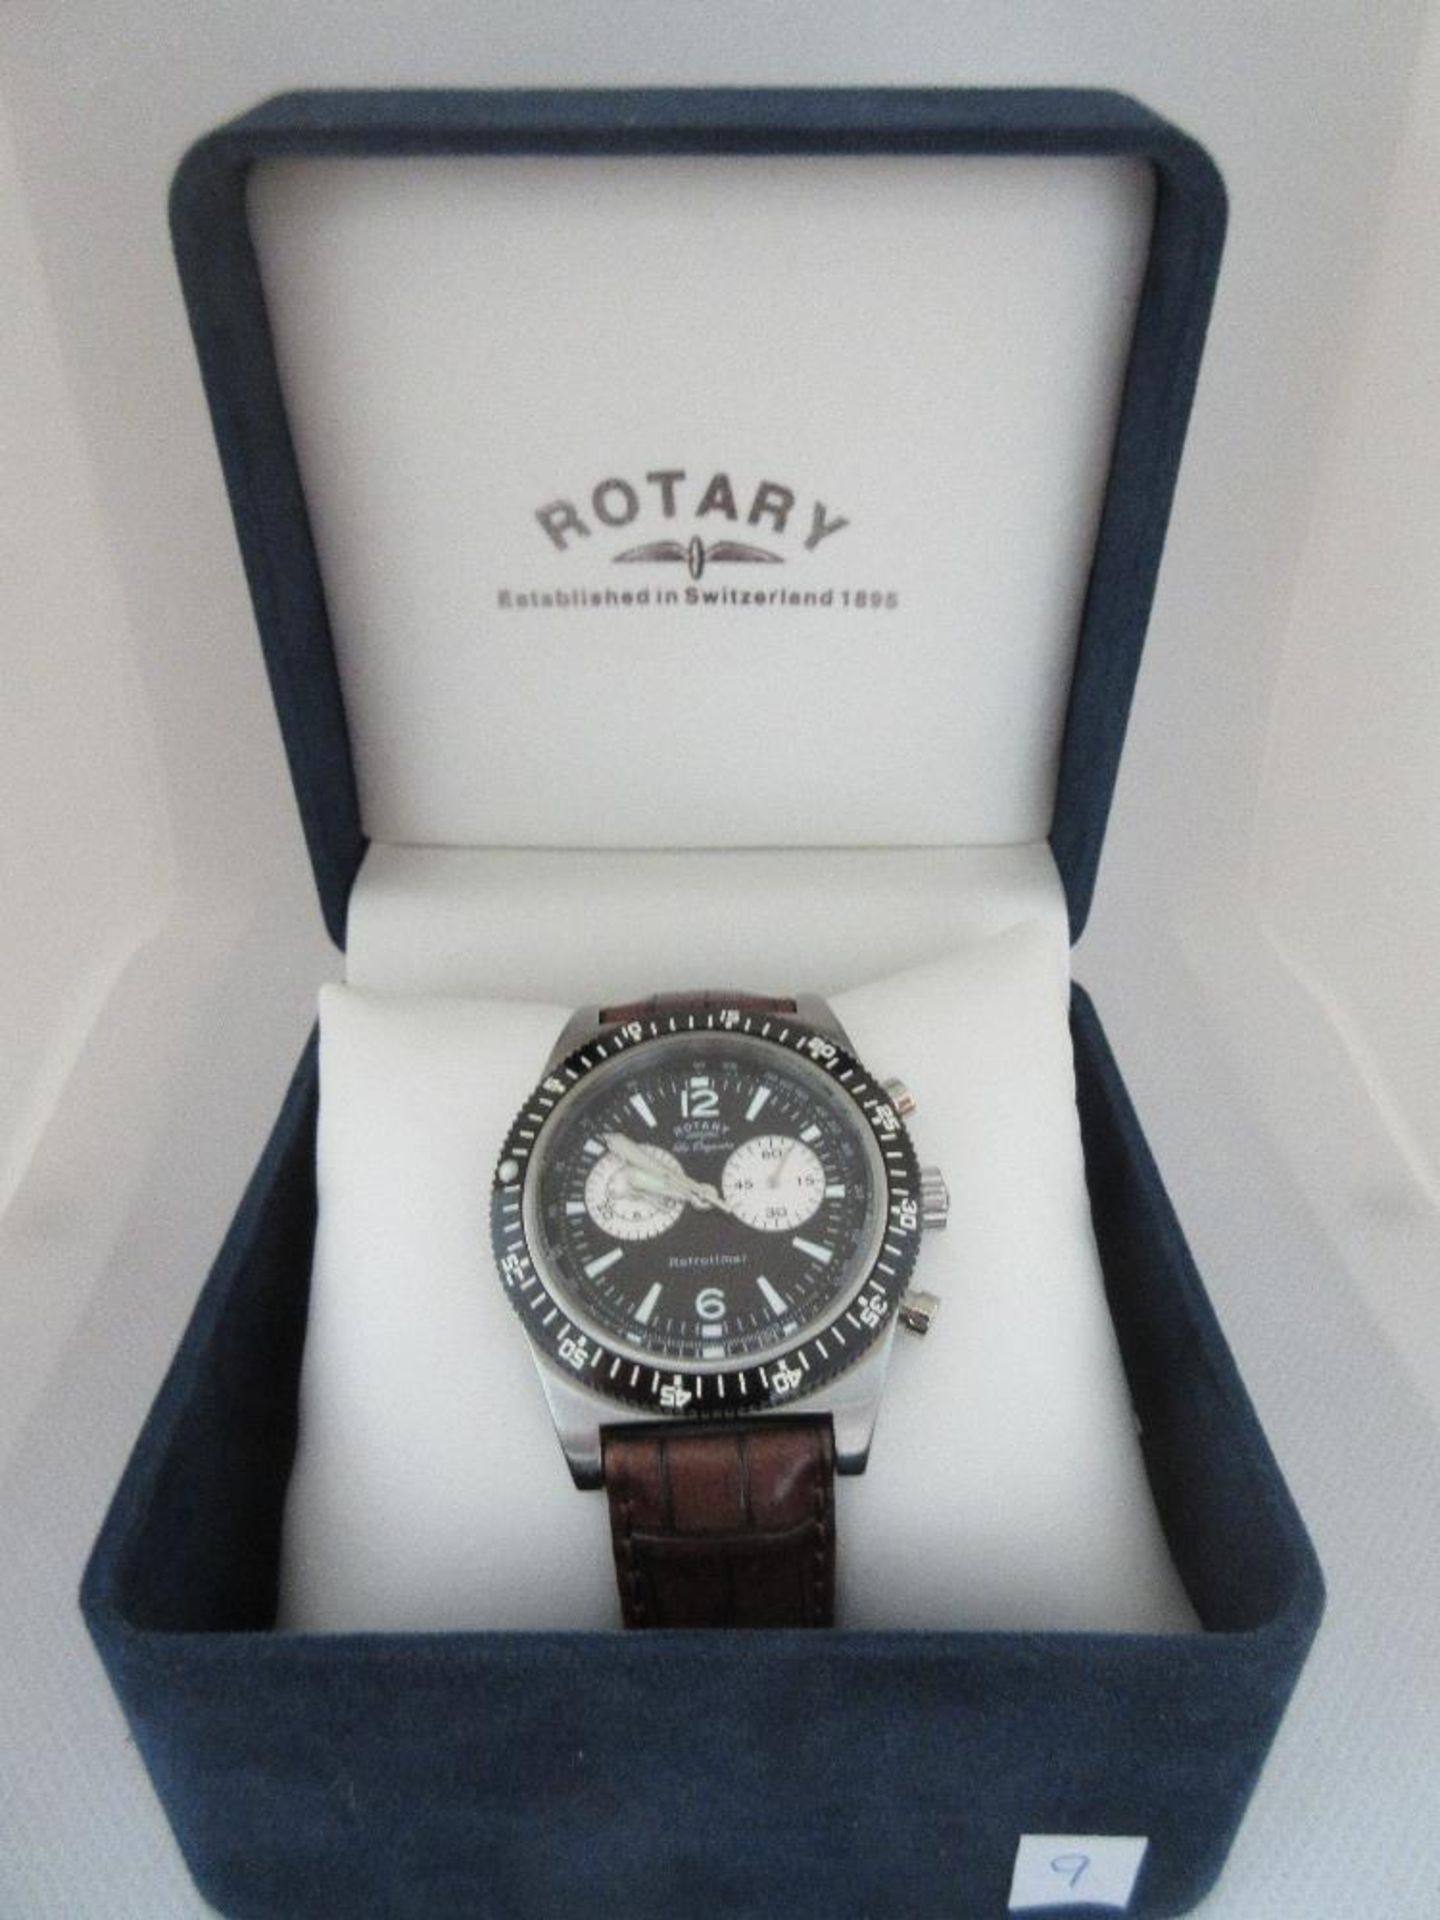 ROTARY MALE WATCH, MODEL GS90030/19, CASE DIAMETER 42MM, LEATHER STRAP, BOXED, RRP £ 299